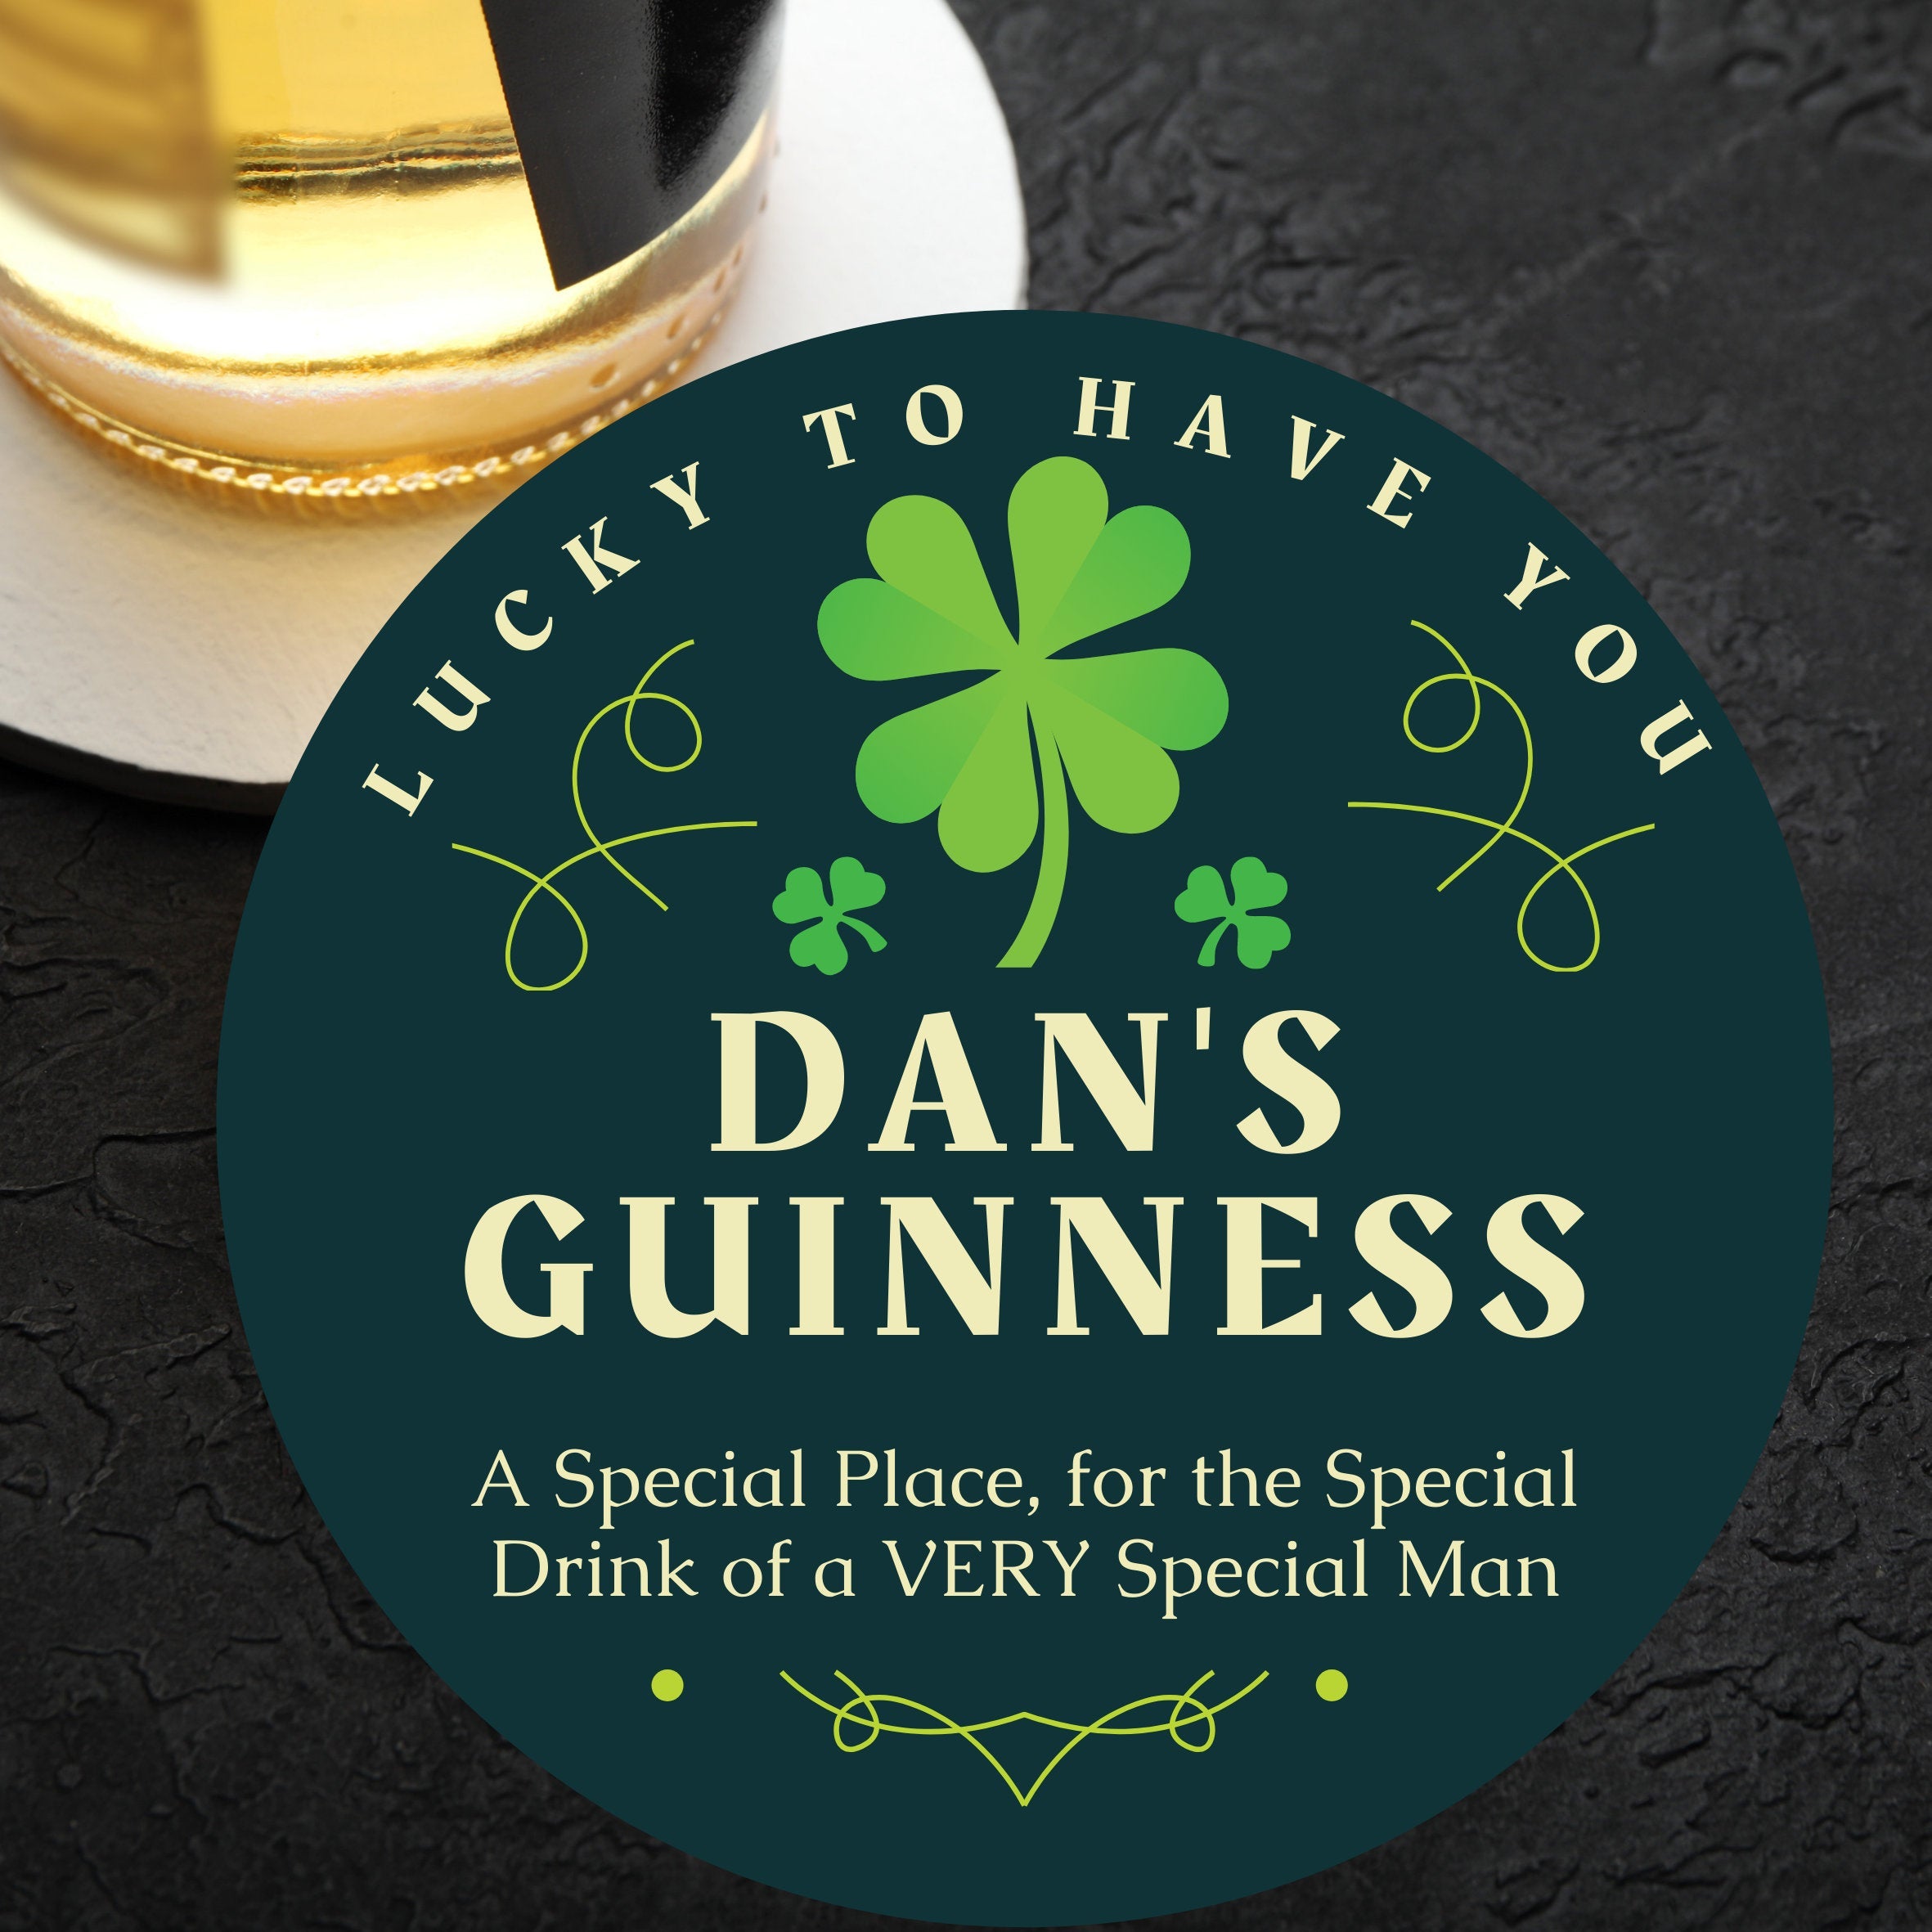 Personalised Name Guinness Coaster - A special place for the special drink of a very special man